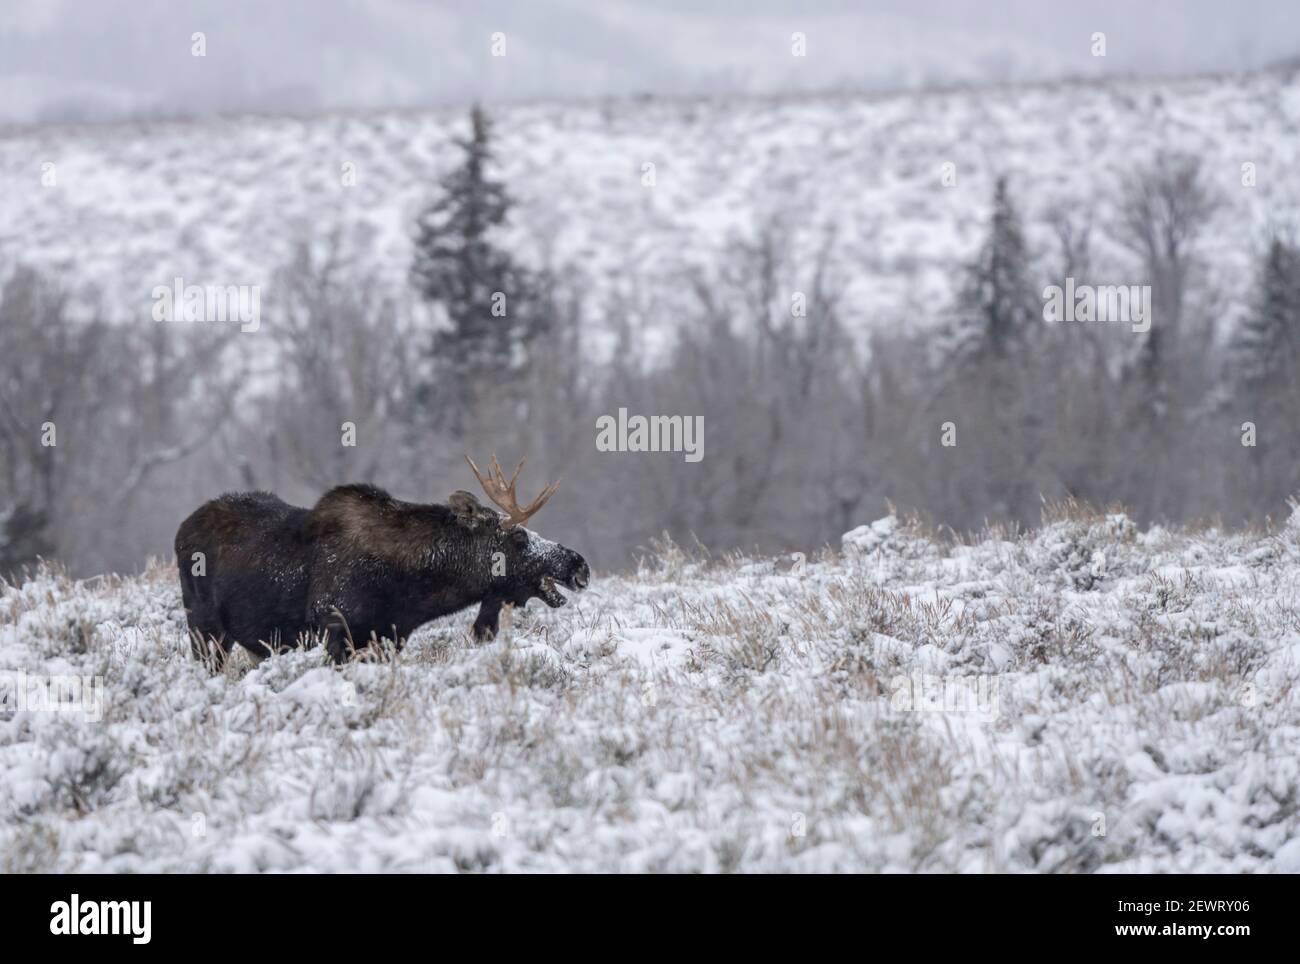 Bull moose (Alces alces), in the snow with open mouth, Grand Teton National Park, Wyoming, United States of America, North America Stock Photo